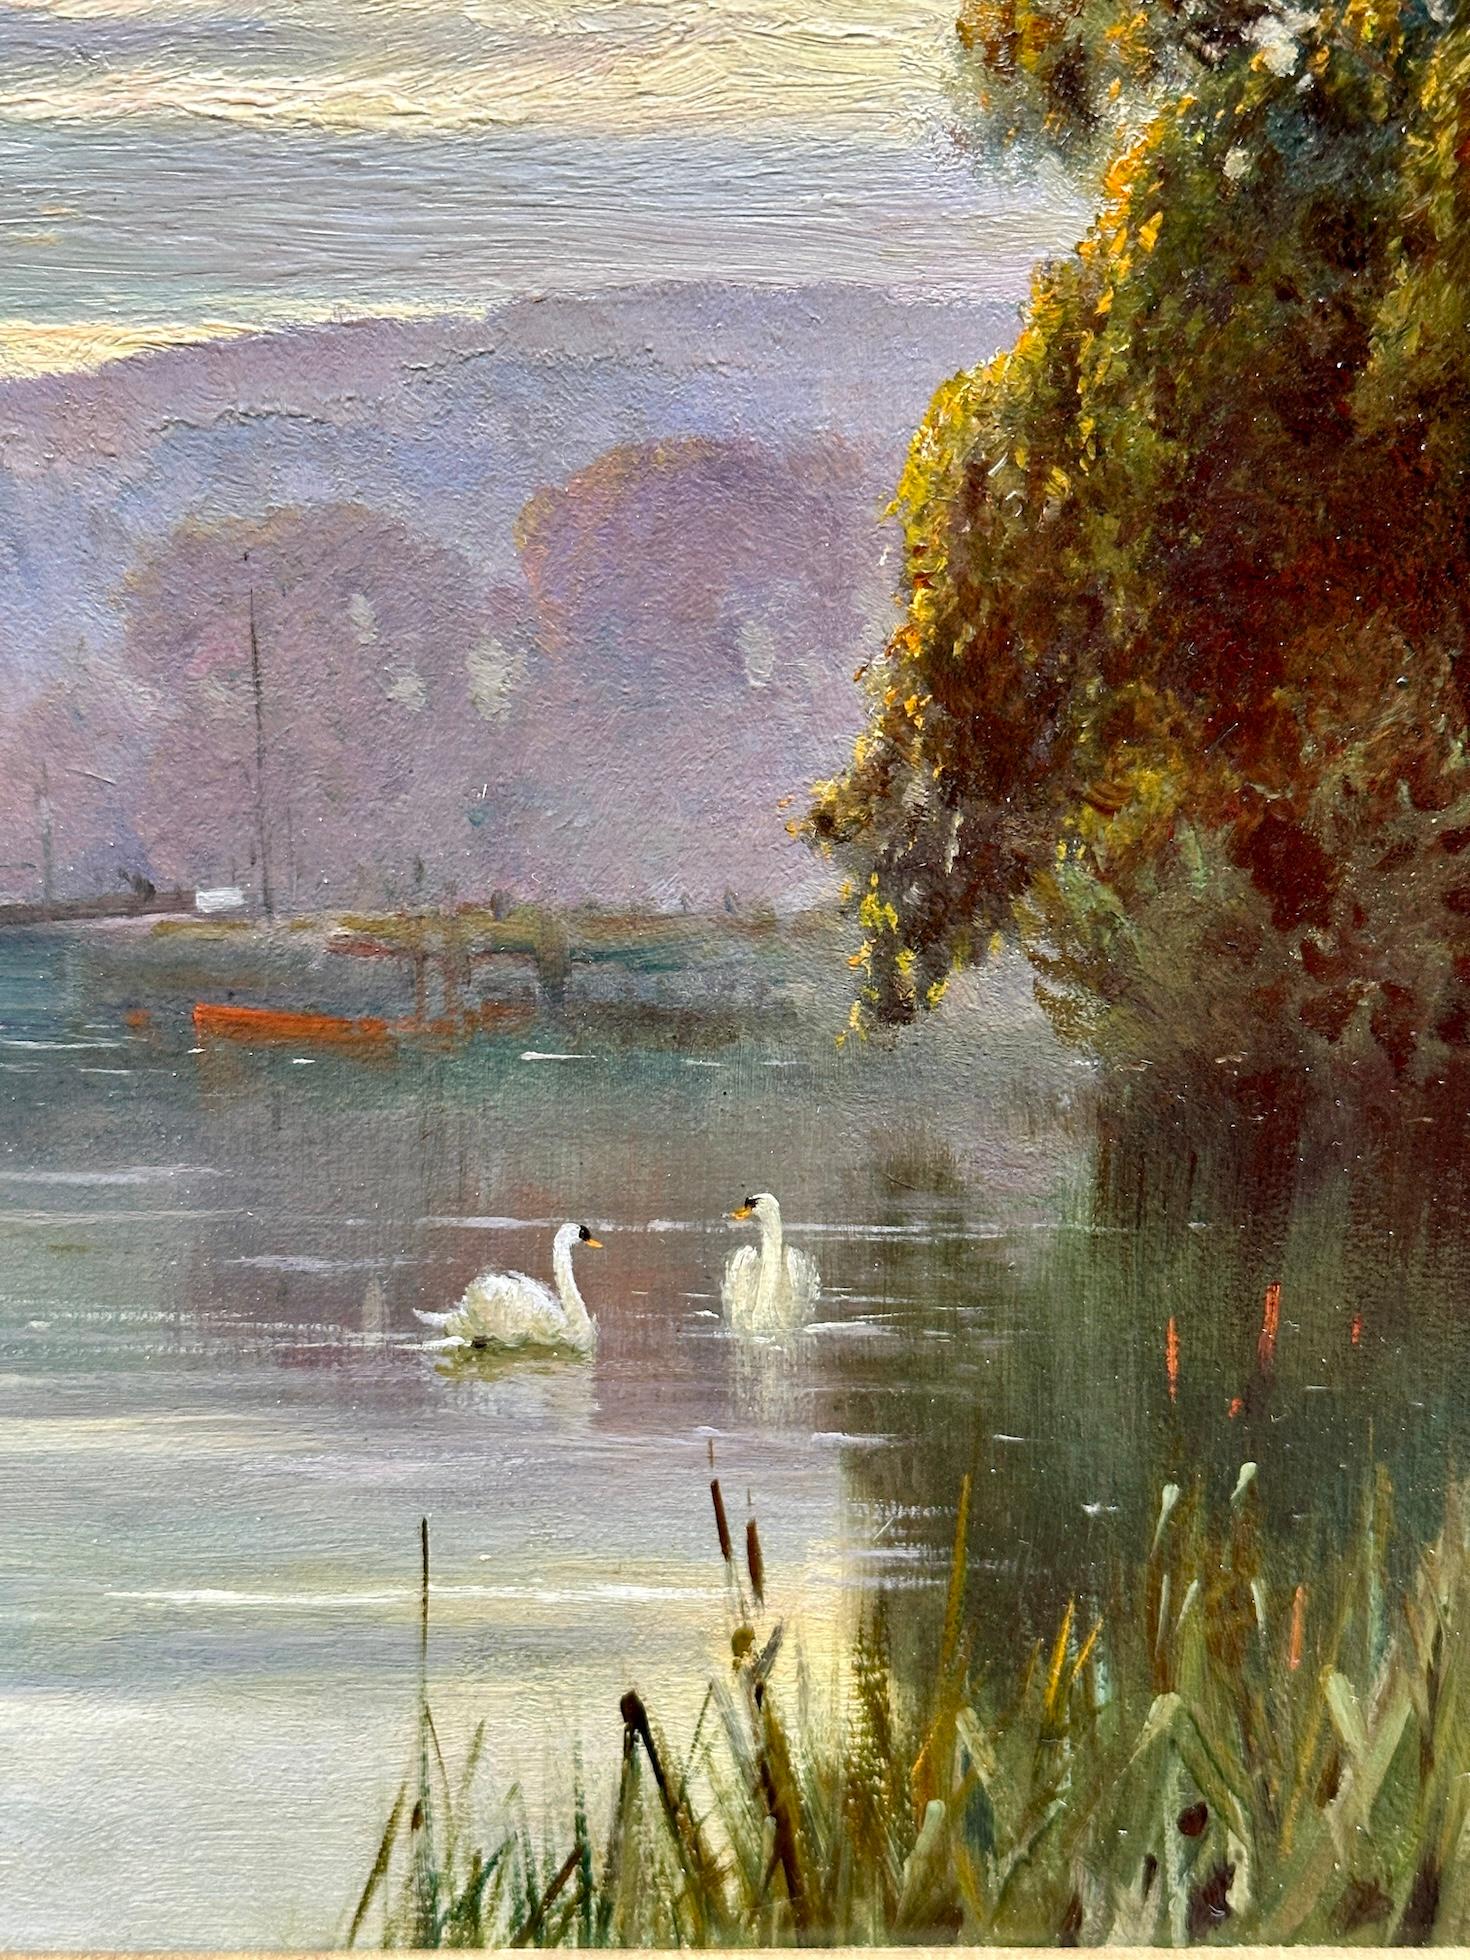 English River landscape, with Church and River at Sunset, Abingdon on the Thames. England

Wonderful scene of Abingdon on the Thames by one of Englands best known landscape painters. Son of Alfred De Breanski Senior Fontville was a very highly